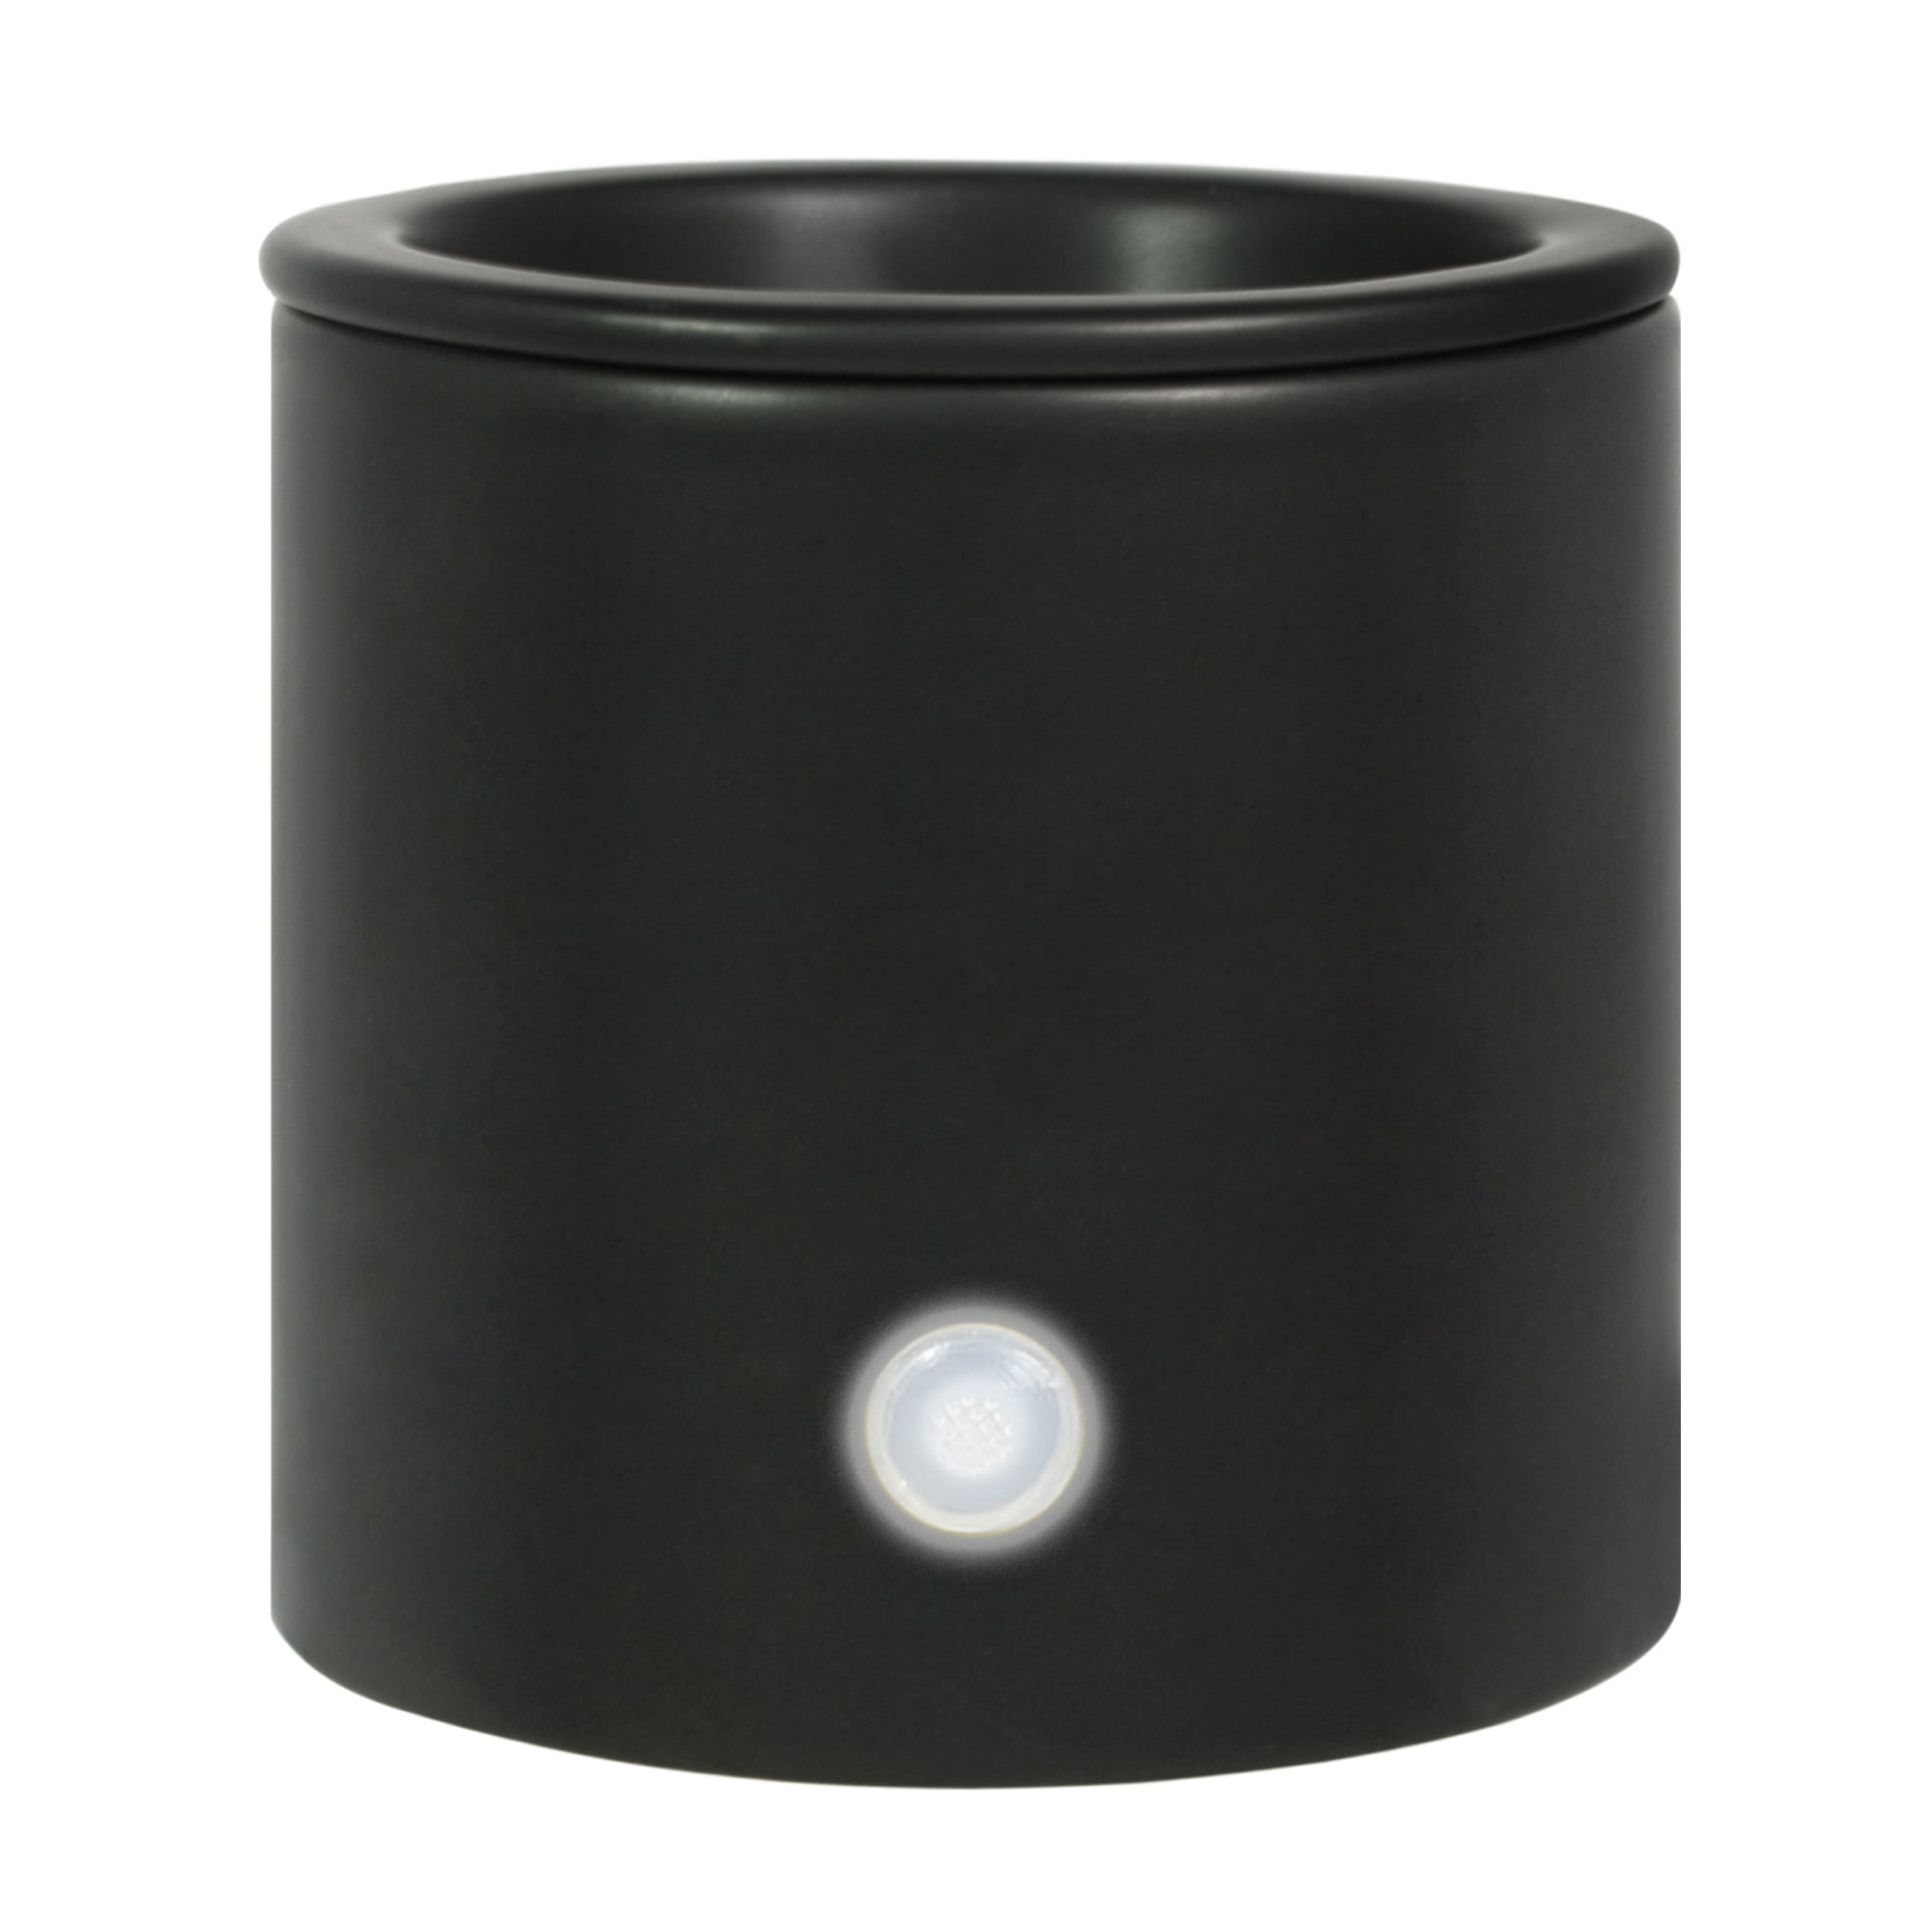 Mainstays Black/Taupe electric simmer pot oil warmer w/free bottle of oil 😲